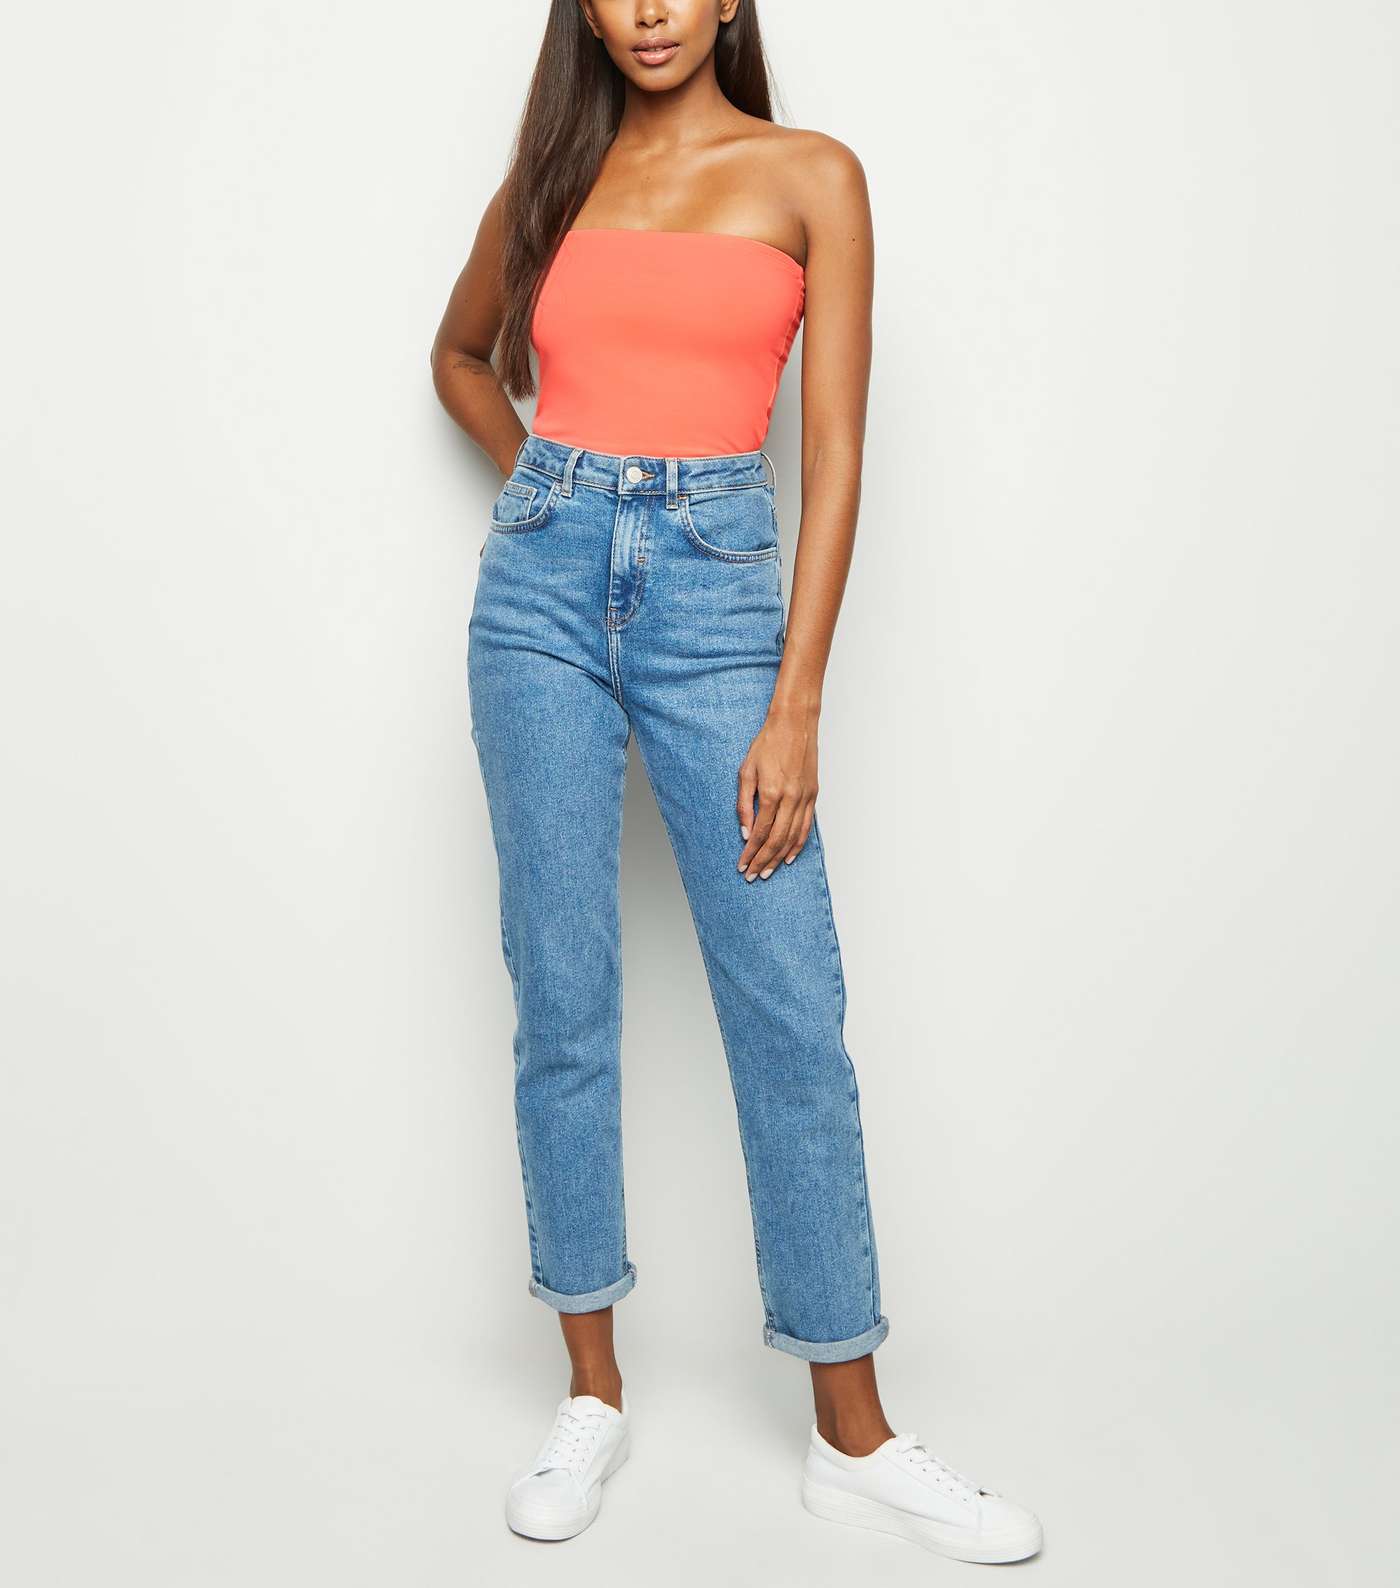 Coral Cropped Bandeau Top Image 2